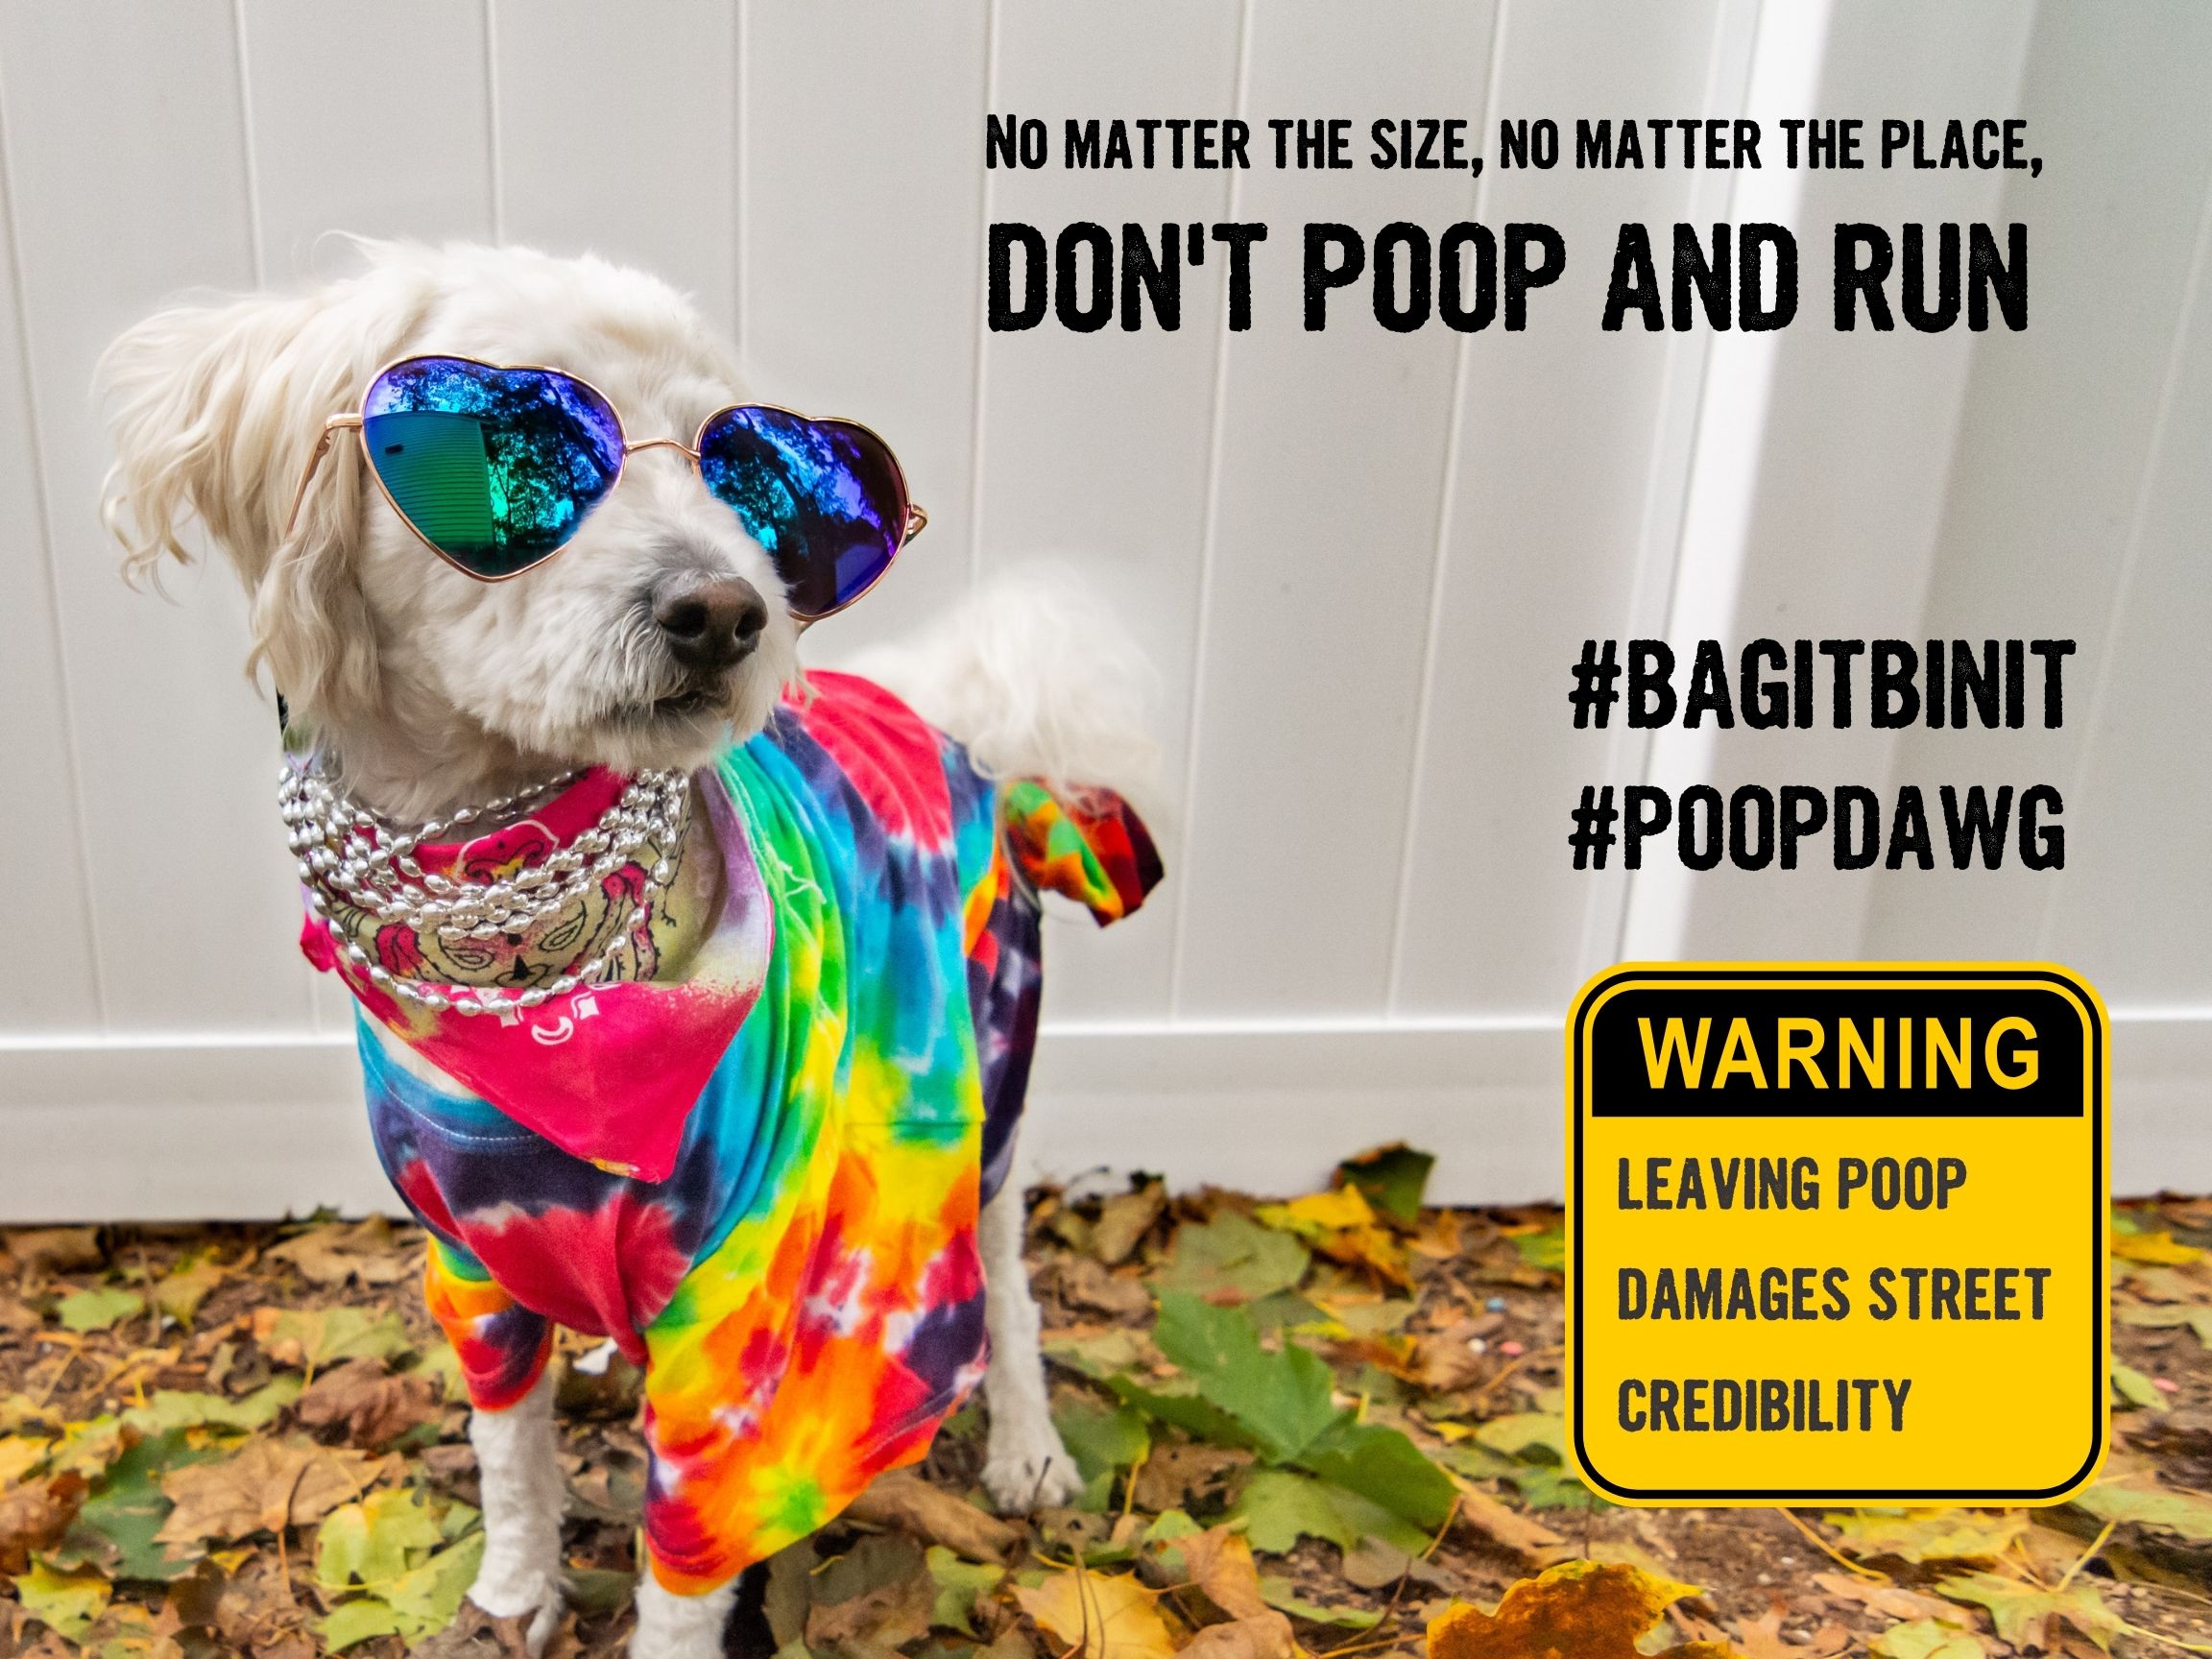 Small white dog dressed in colourful scarf and sunglasses, Don't poop and run